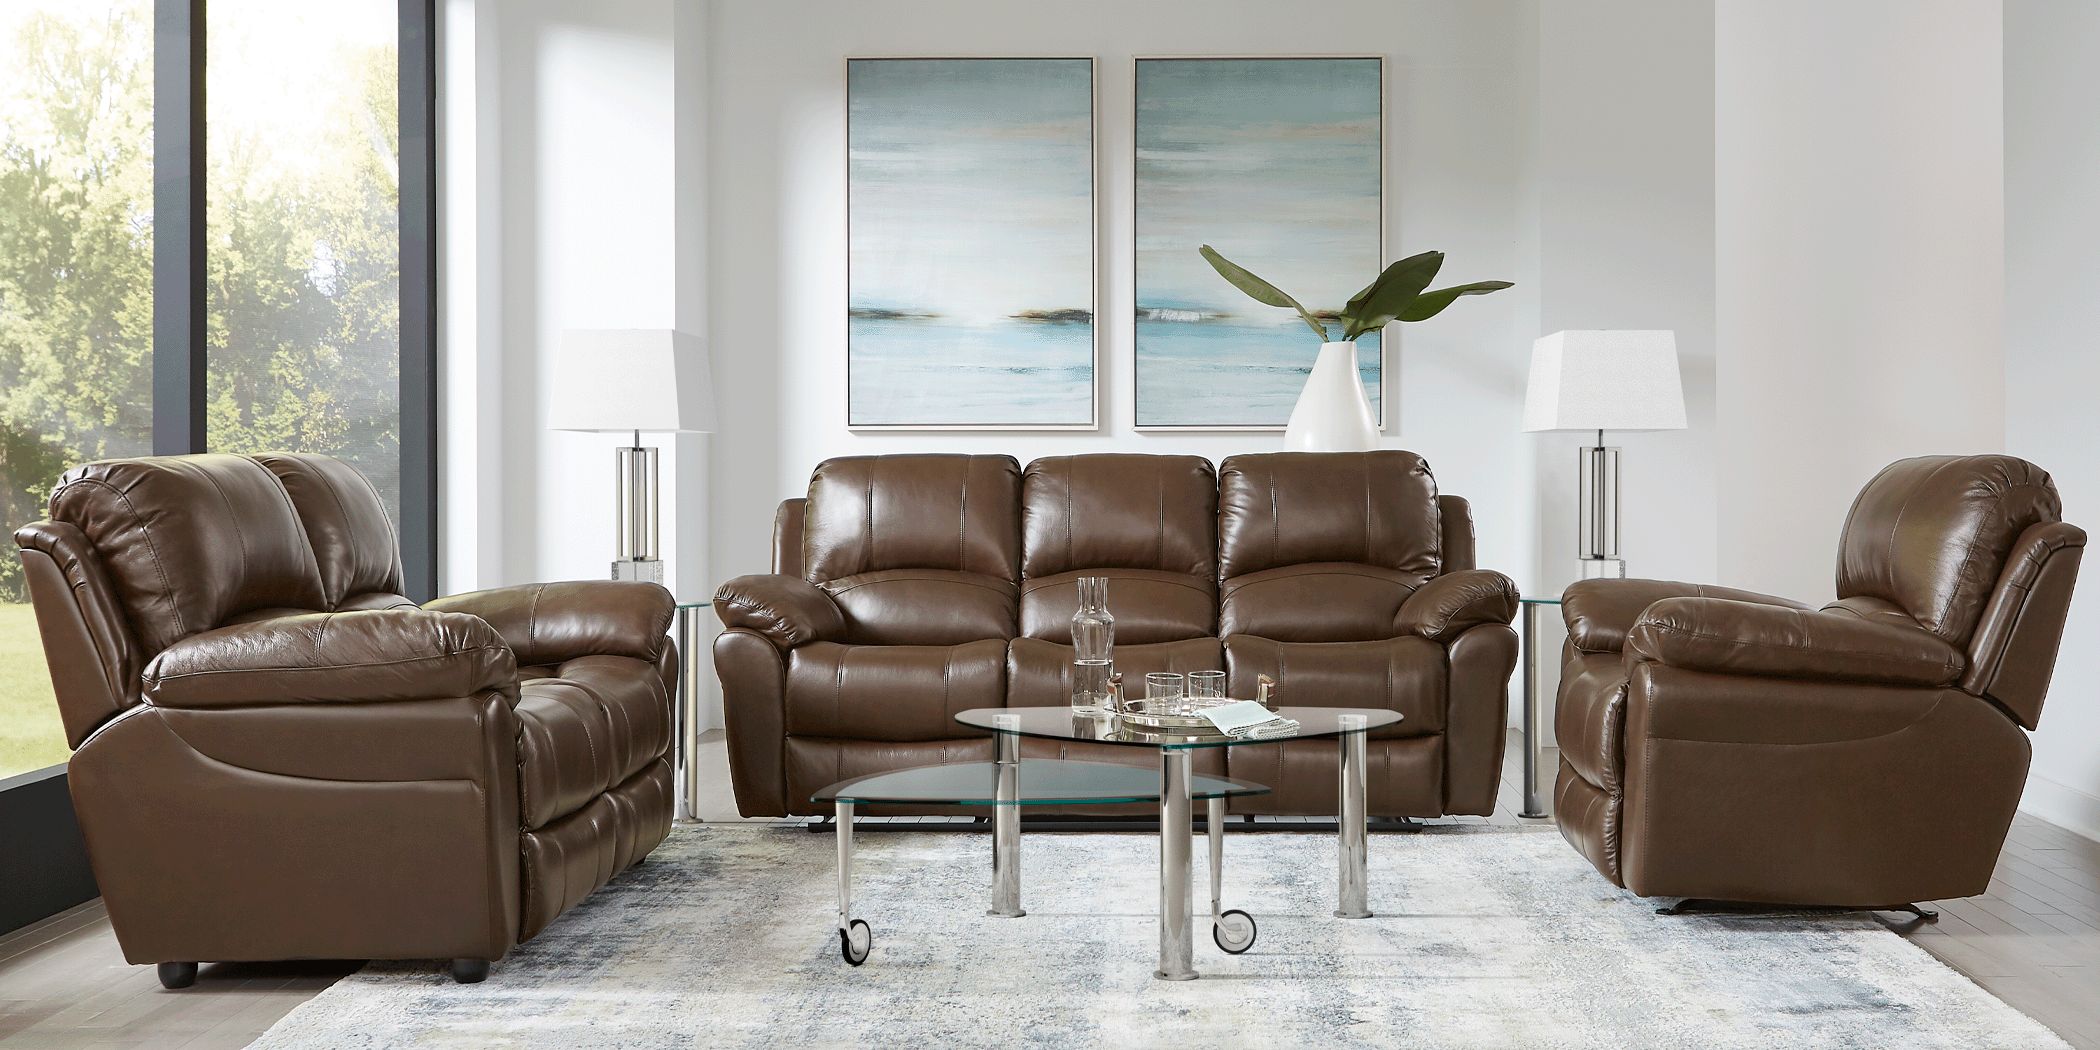 vercelli leather sofa reviews